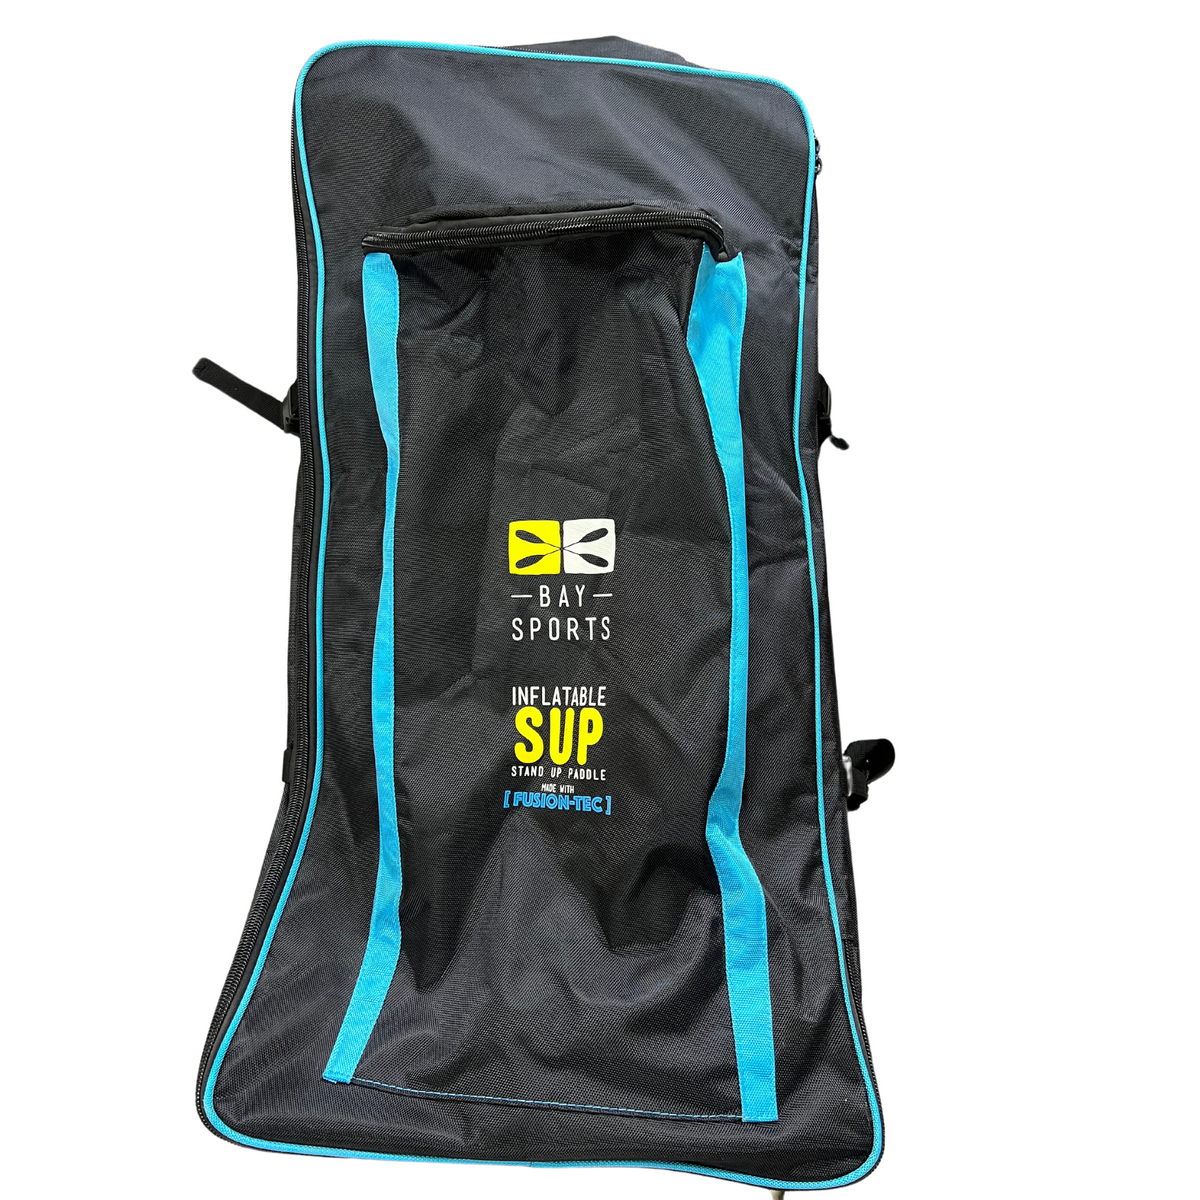 Inflatable SUP Backpack, Stand Up Paddle Board Bag | Bay Sports